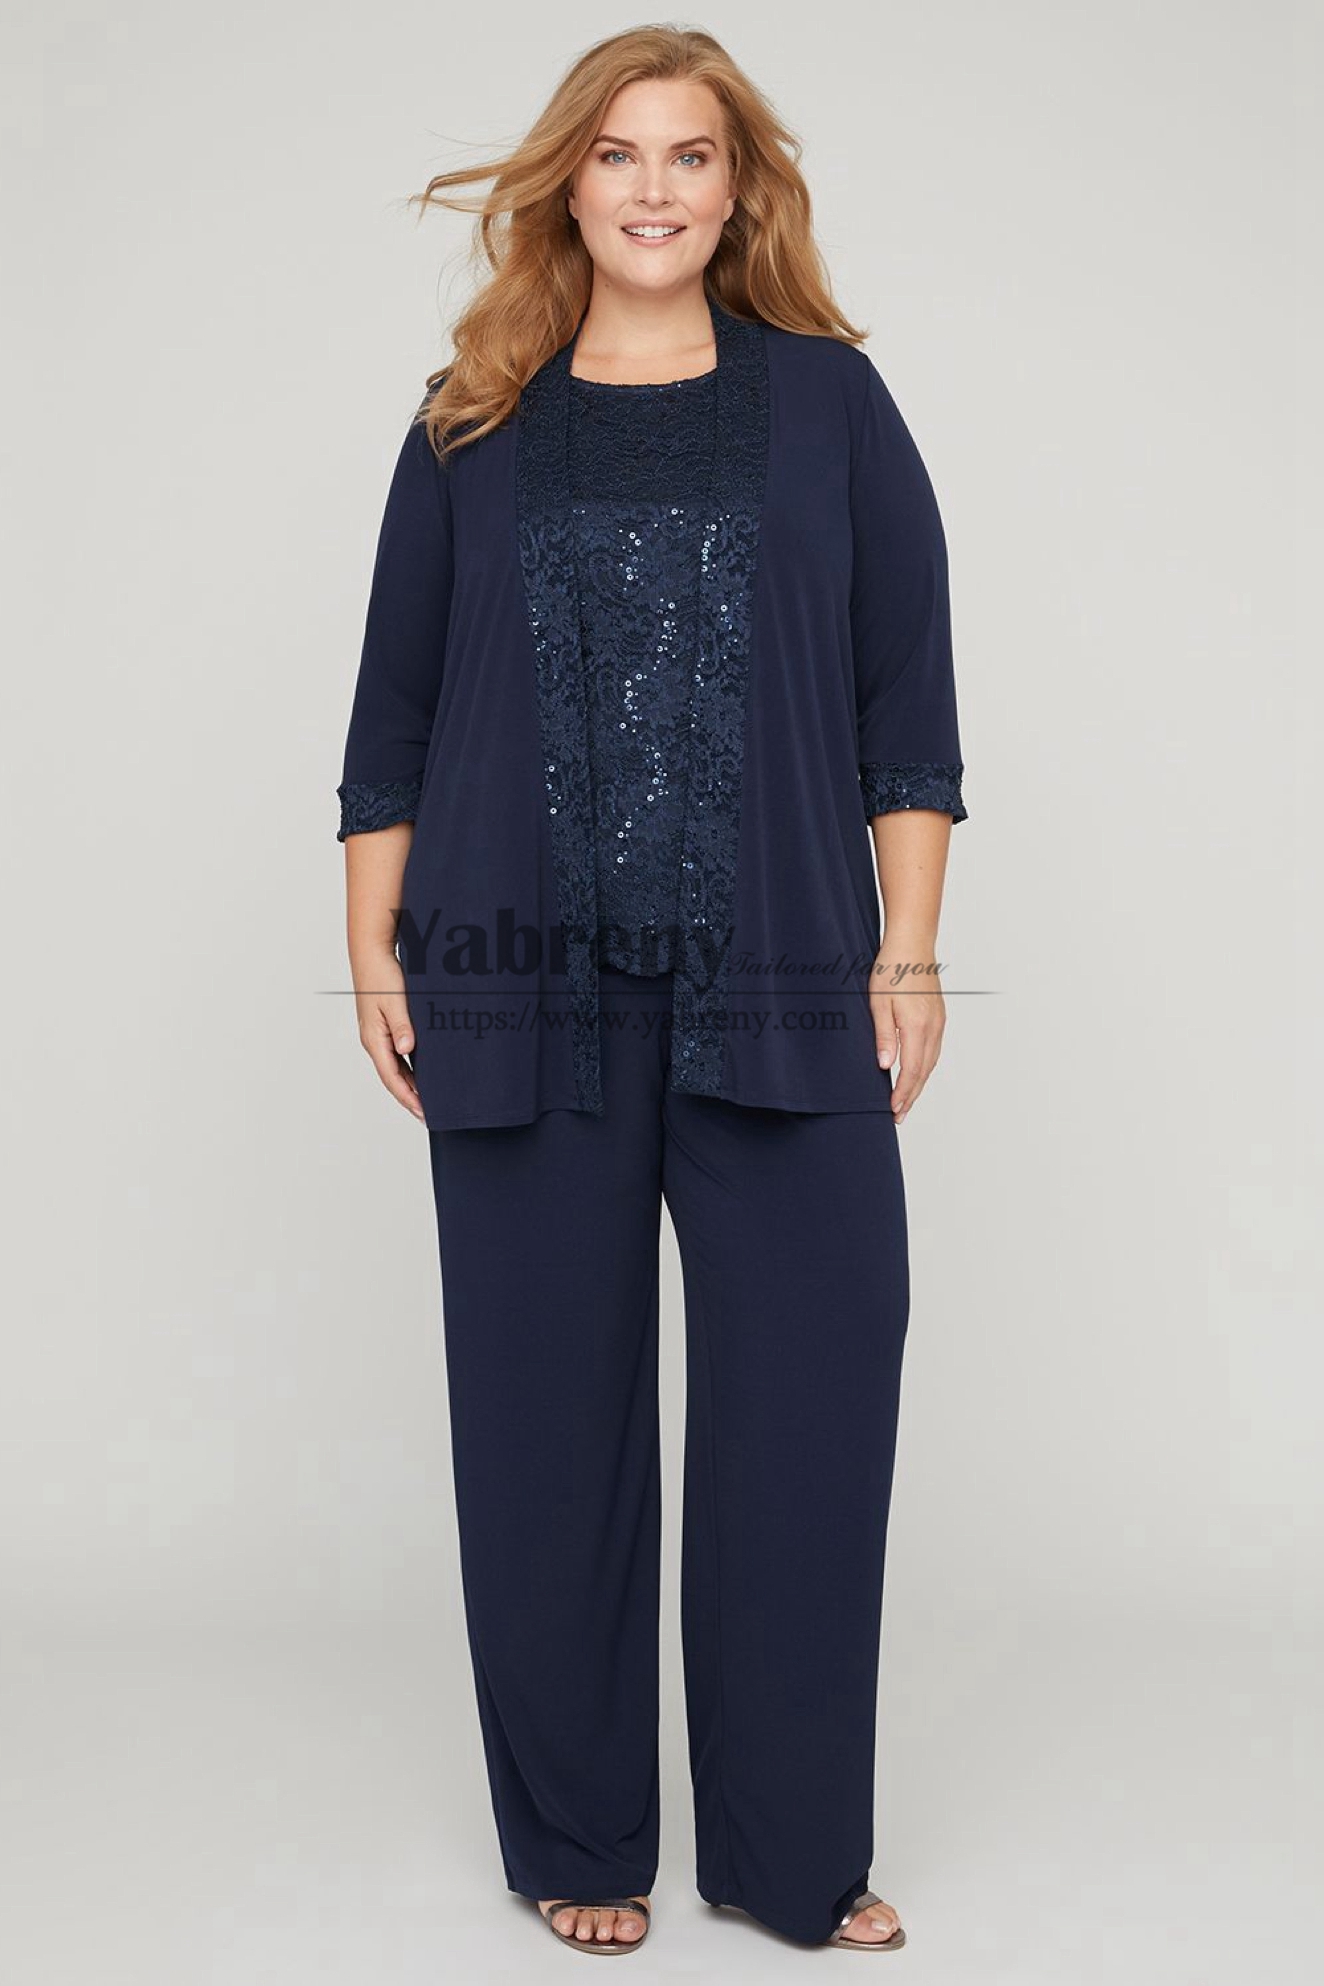 Plus Size Mother of the Bride Pant Suits with Jacket Grandmother ...